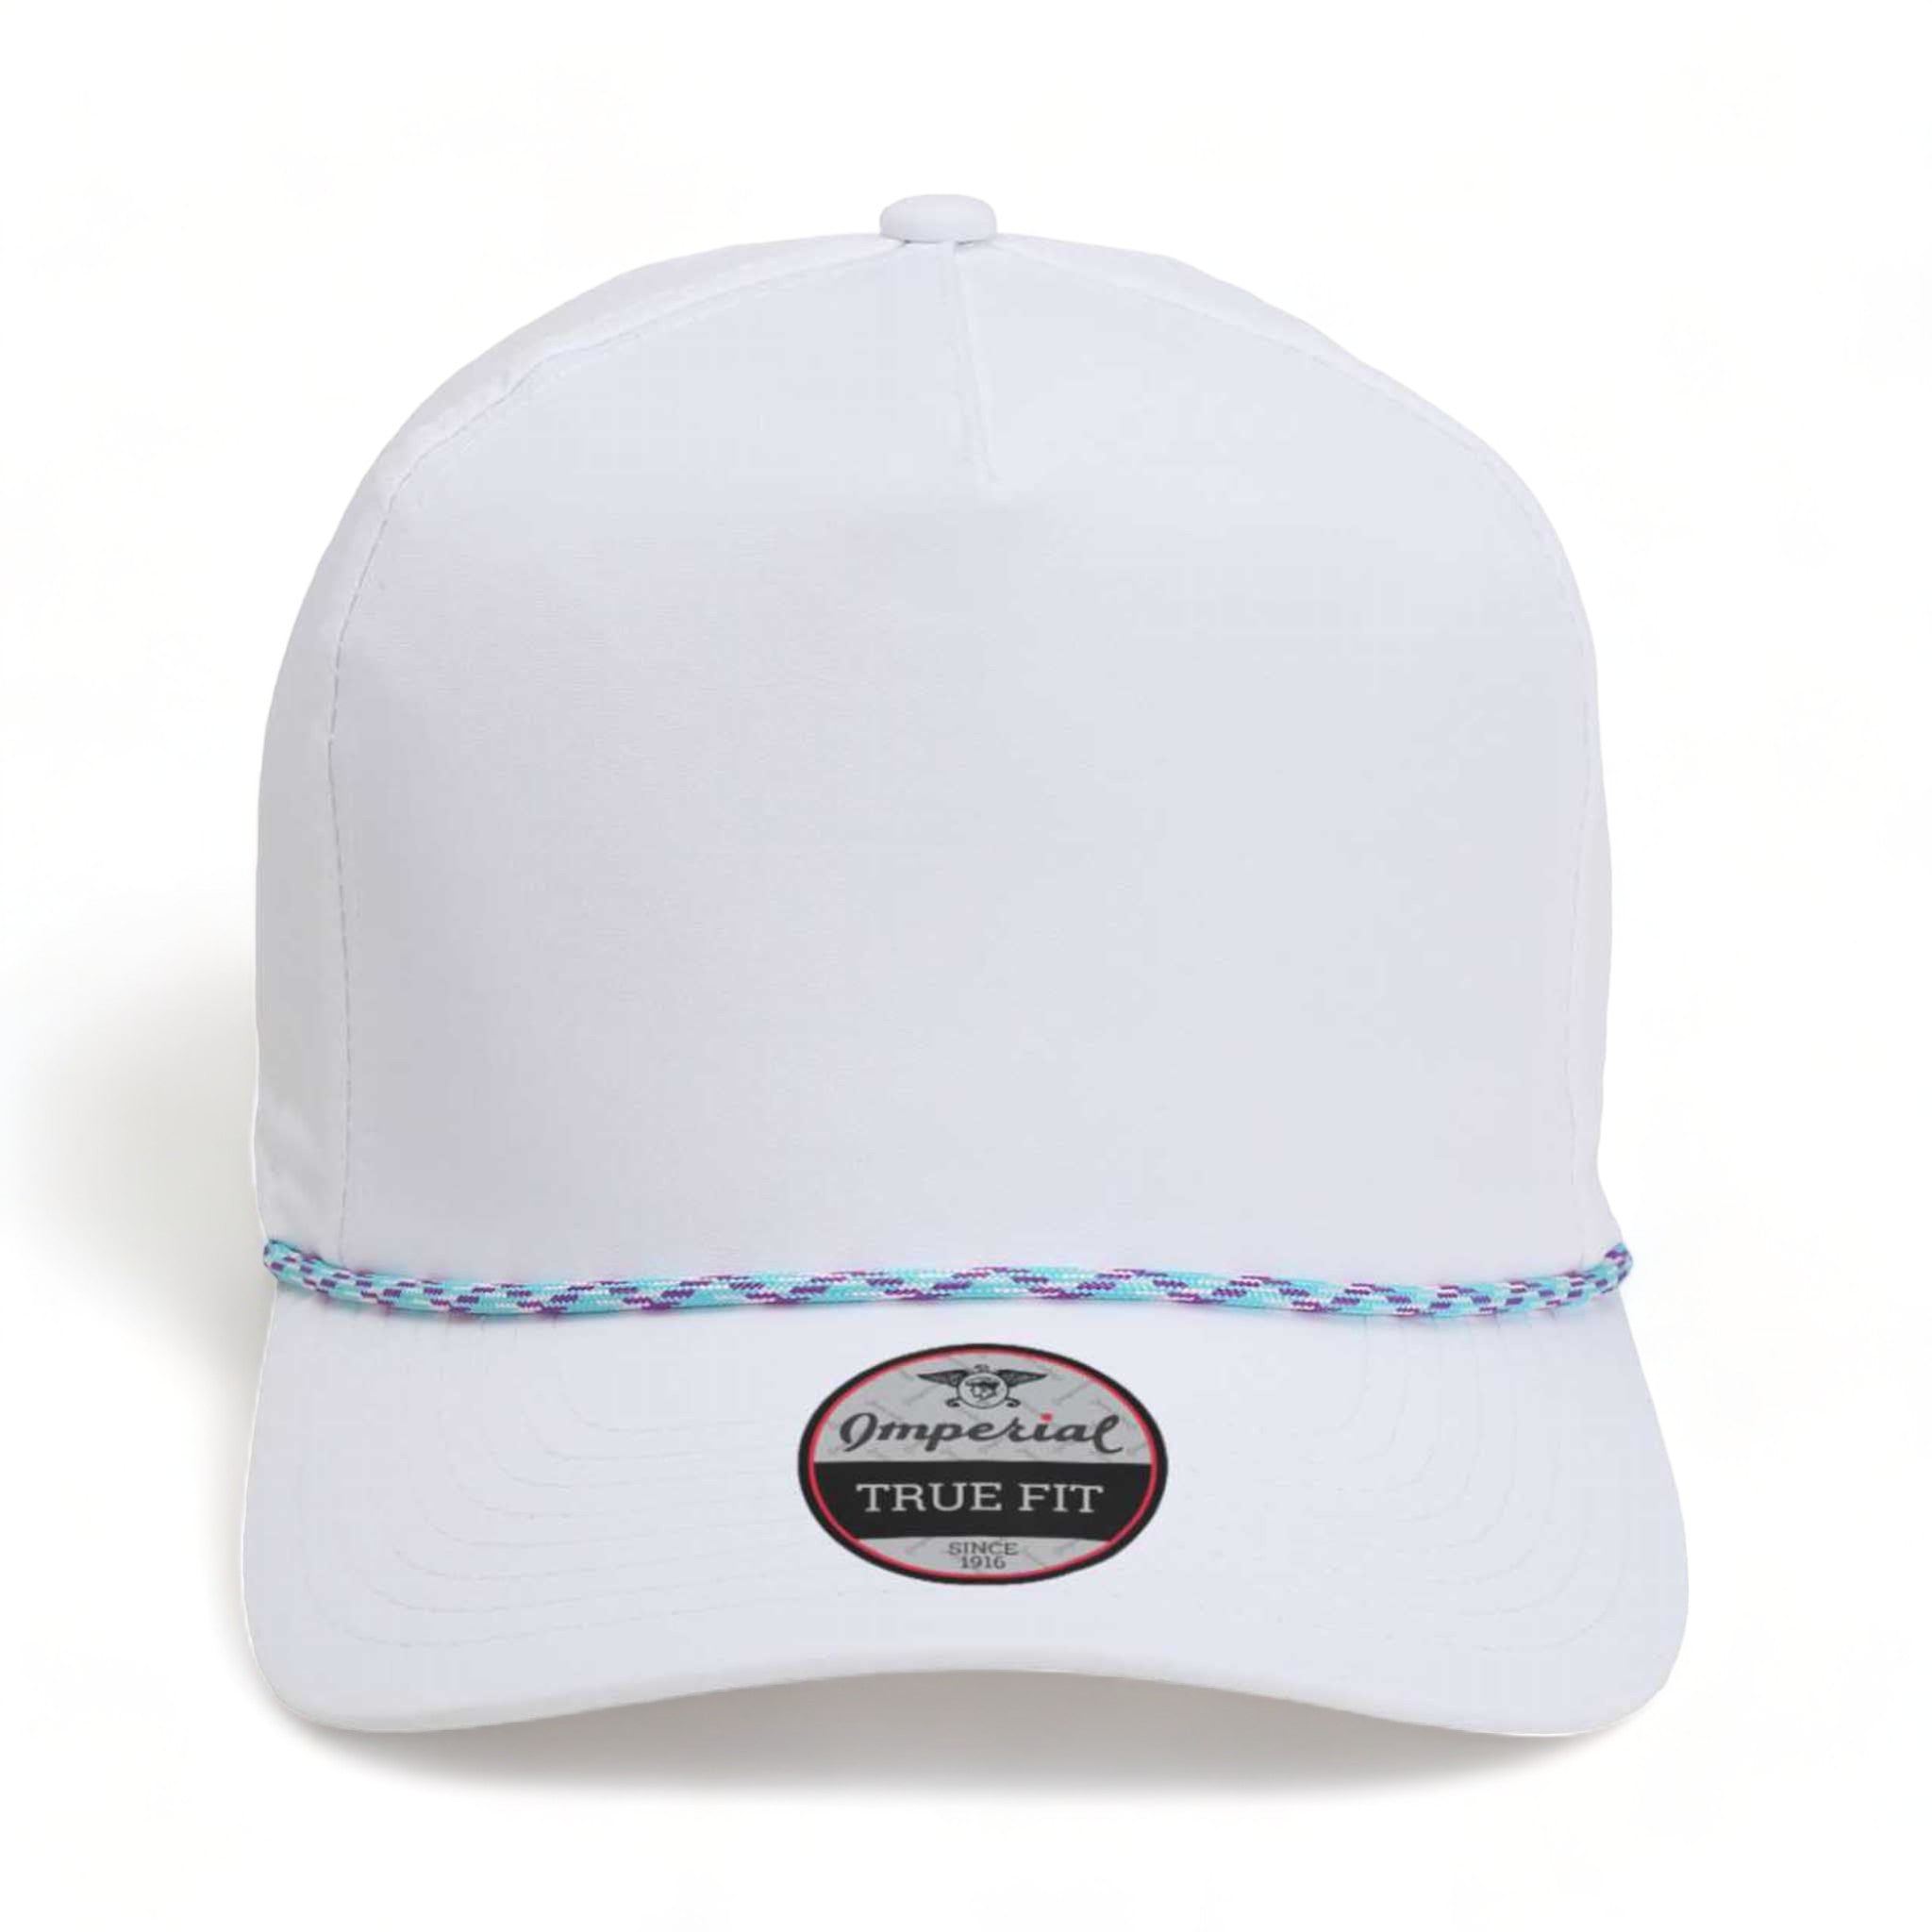 Front view of Imperial 5054 custom hat in white and teal-purple